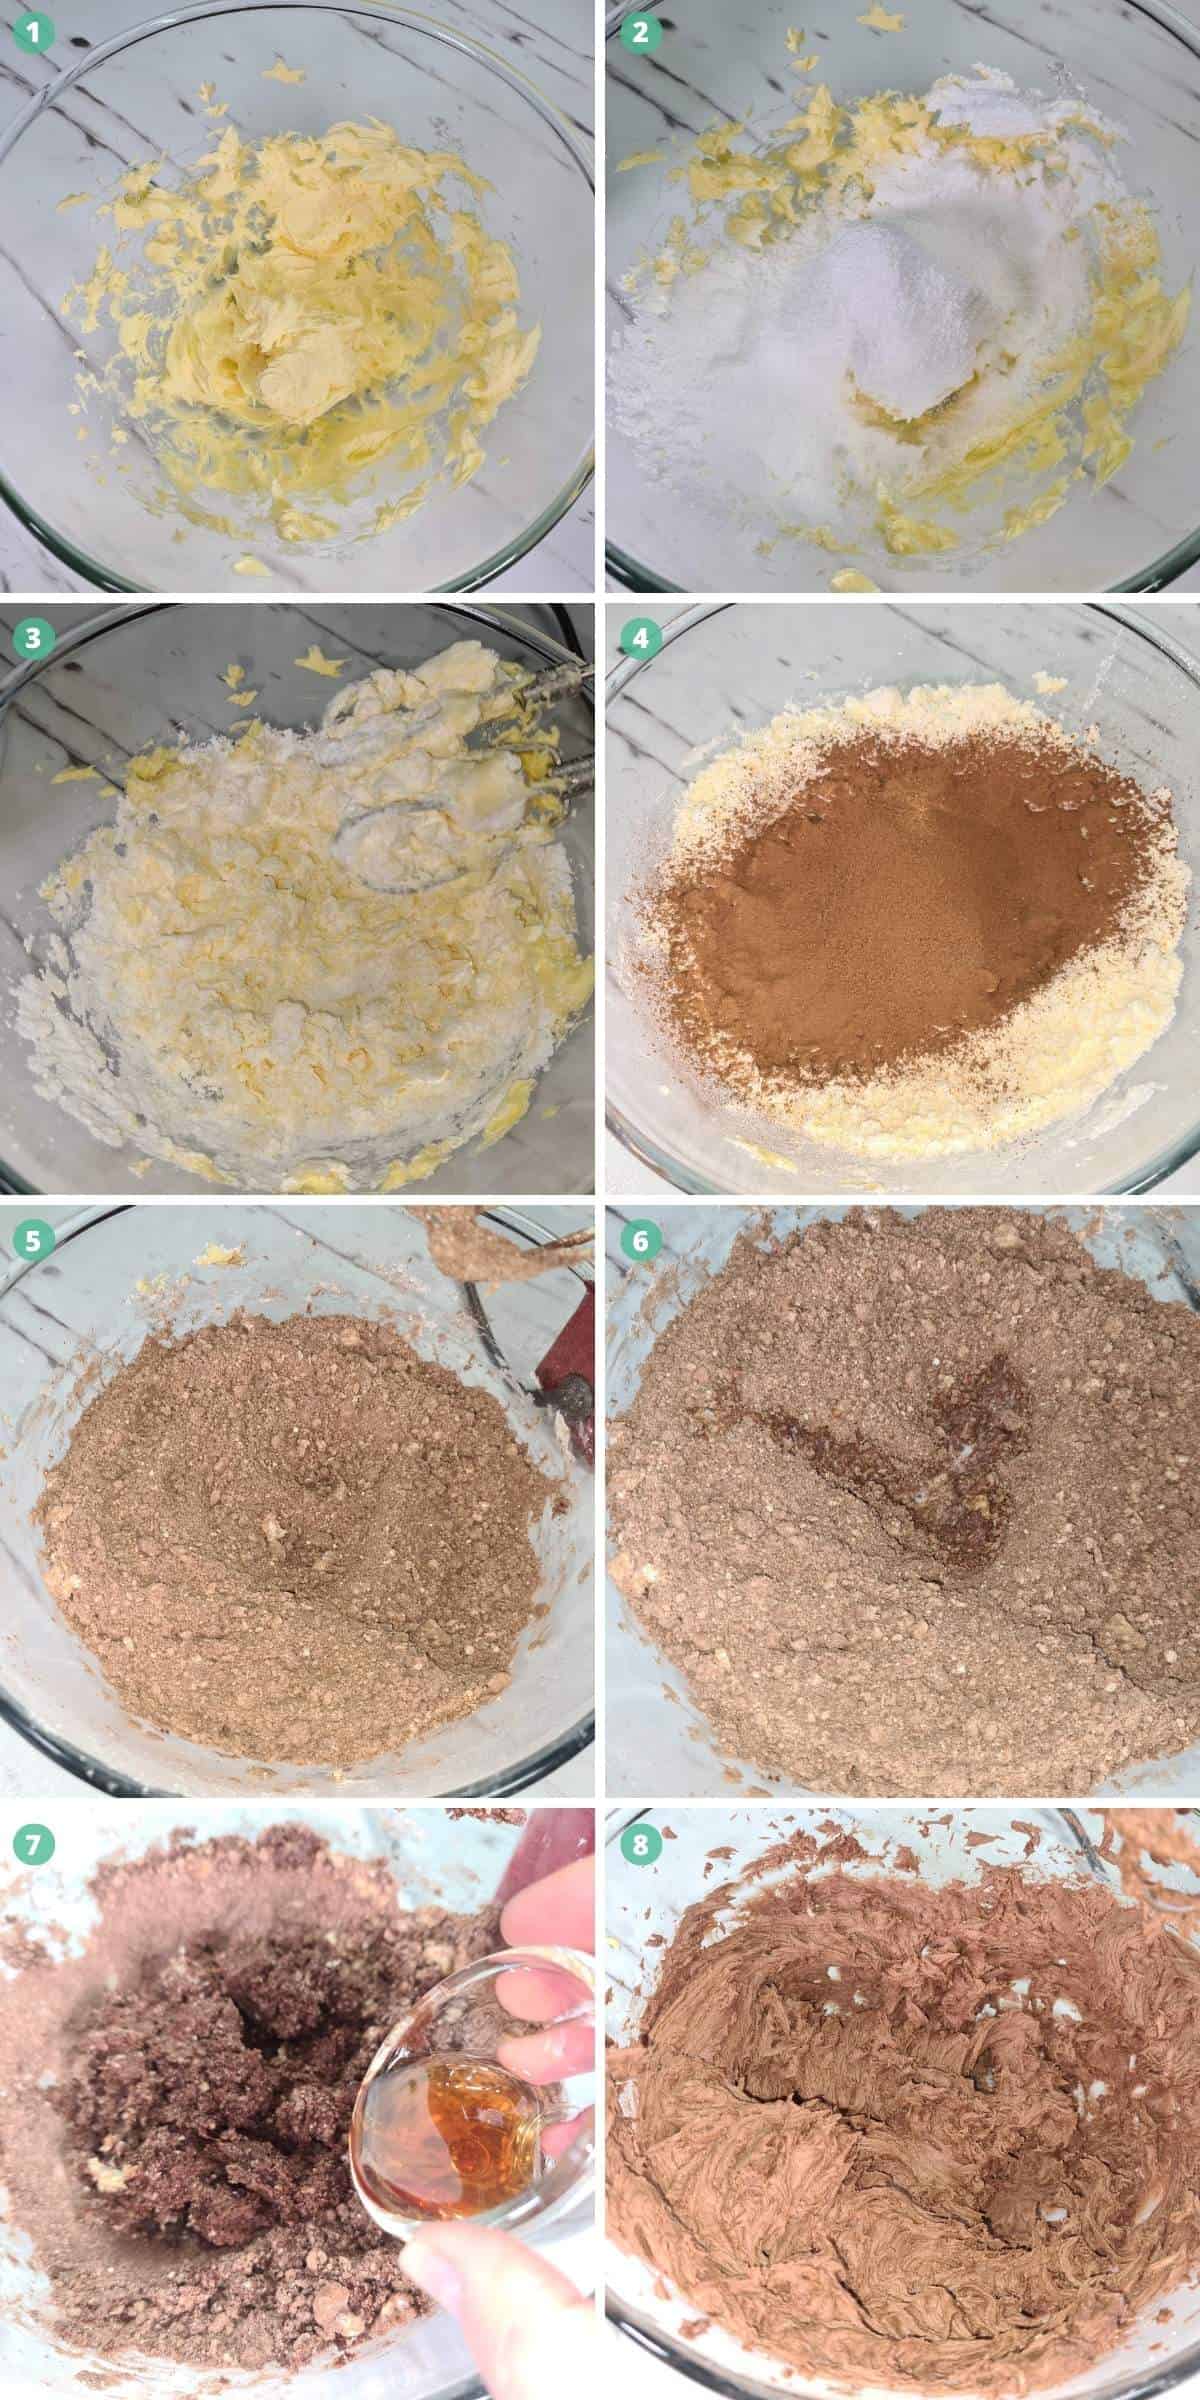 how-to-make-the-chocolate-buttercream-icing-for-the-chocolate-cake